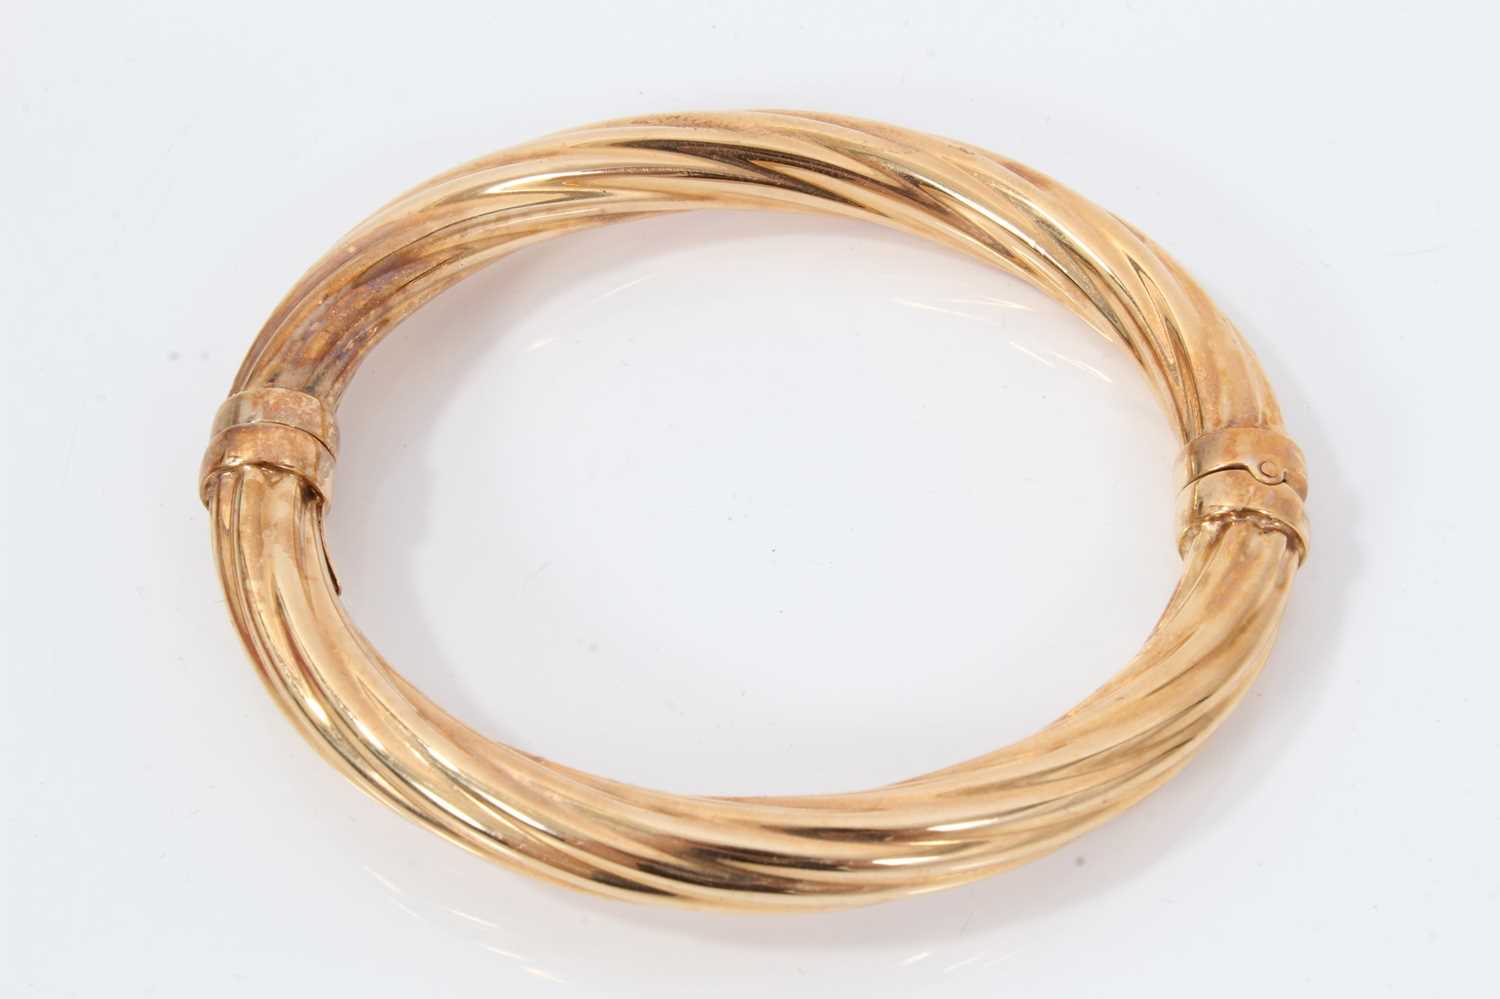 Lot 1993 - 9ct yellow gold hinged bangle with spiral twist design